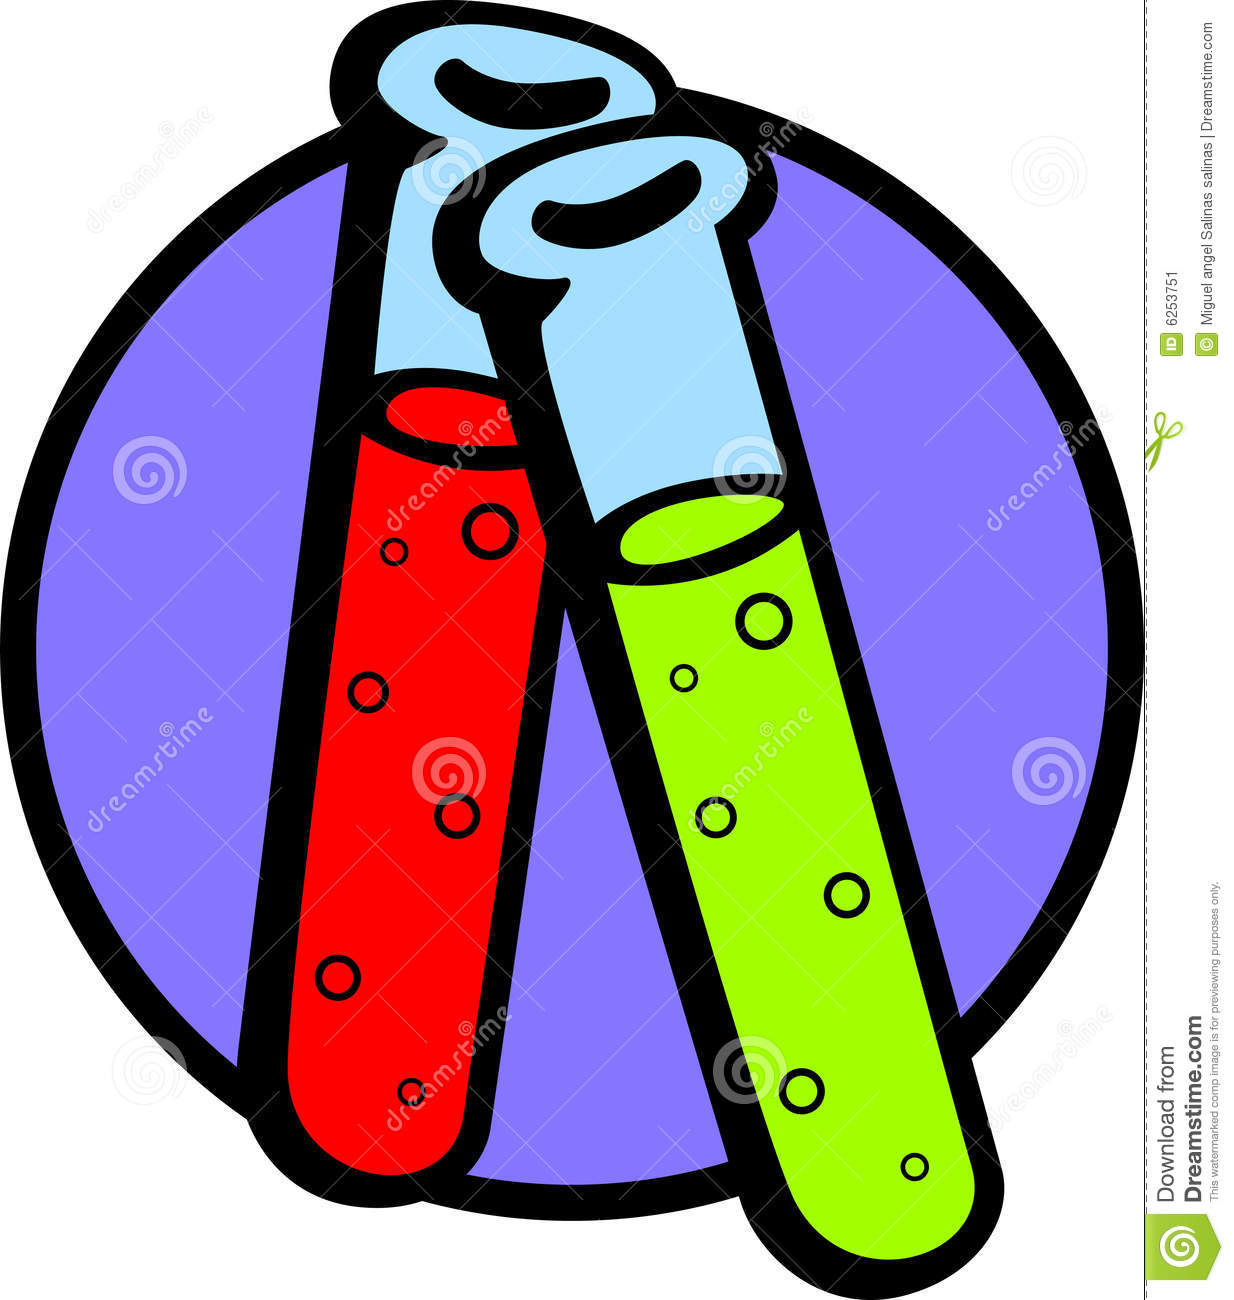 Test Tubes With Chemicals Vector Illustration Stock Image   Image